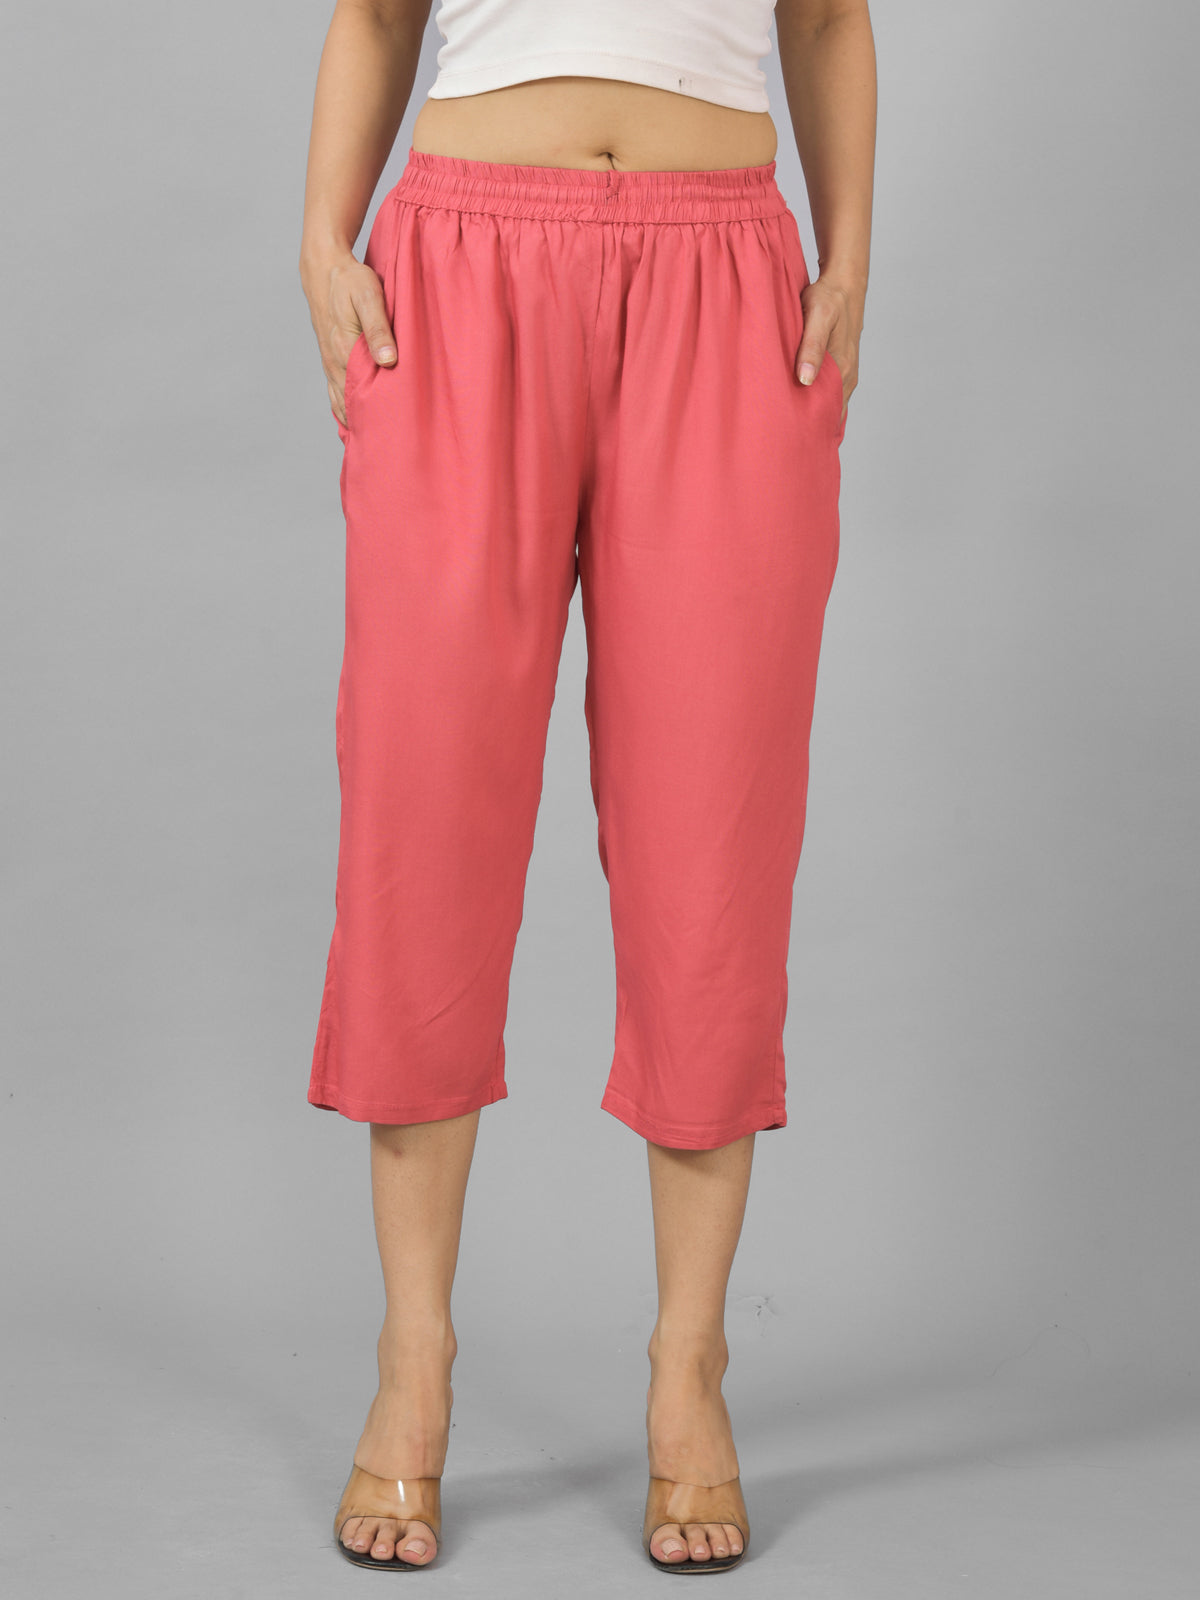 Pack Of 2 Womens Mauve Pink And White Calf Length Rayon Culottes Trouser Combo